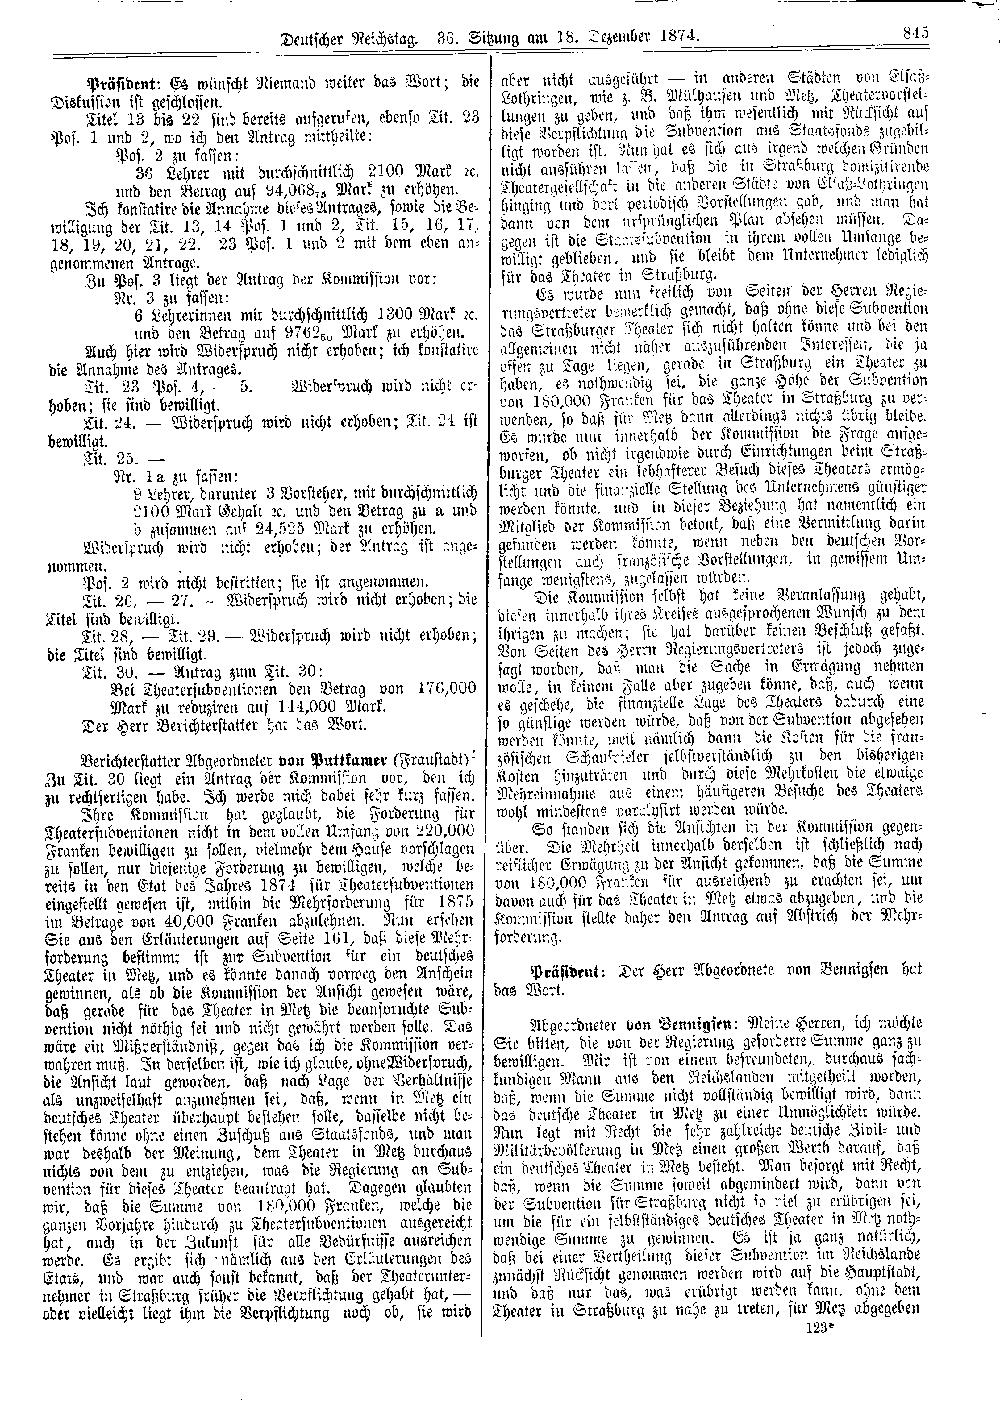 Scan of page 845